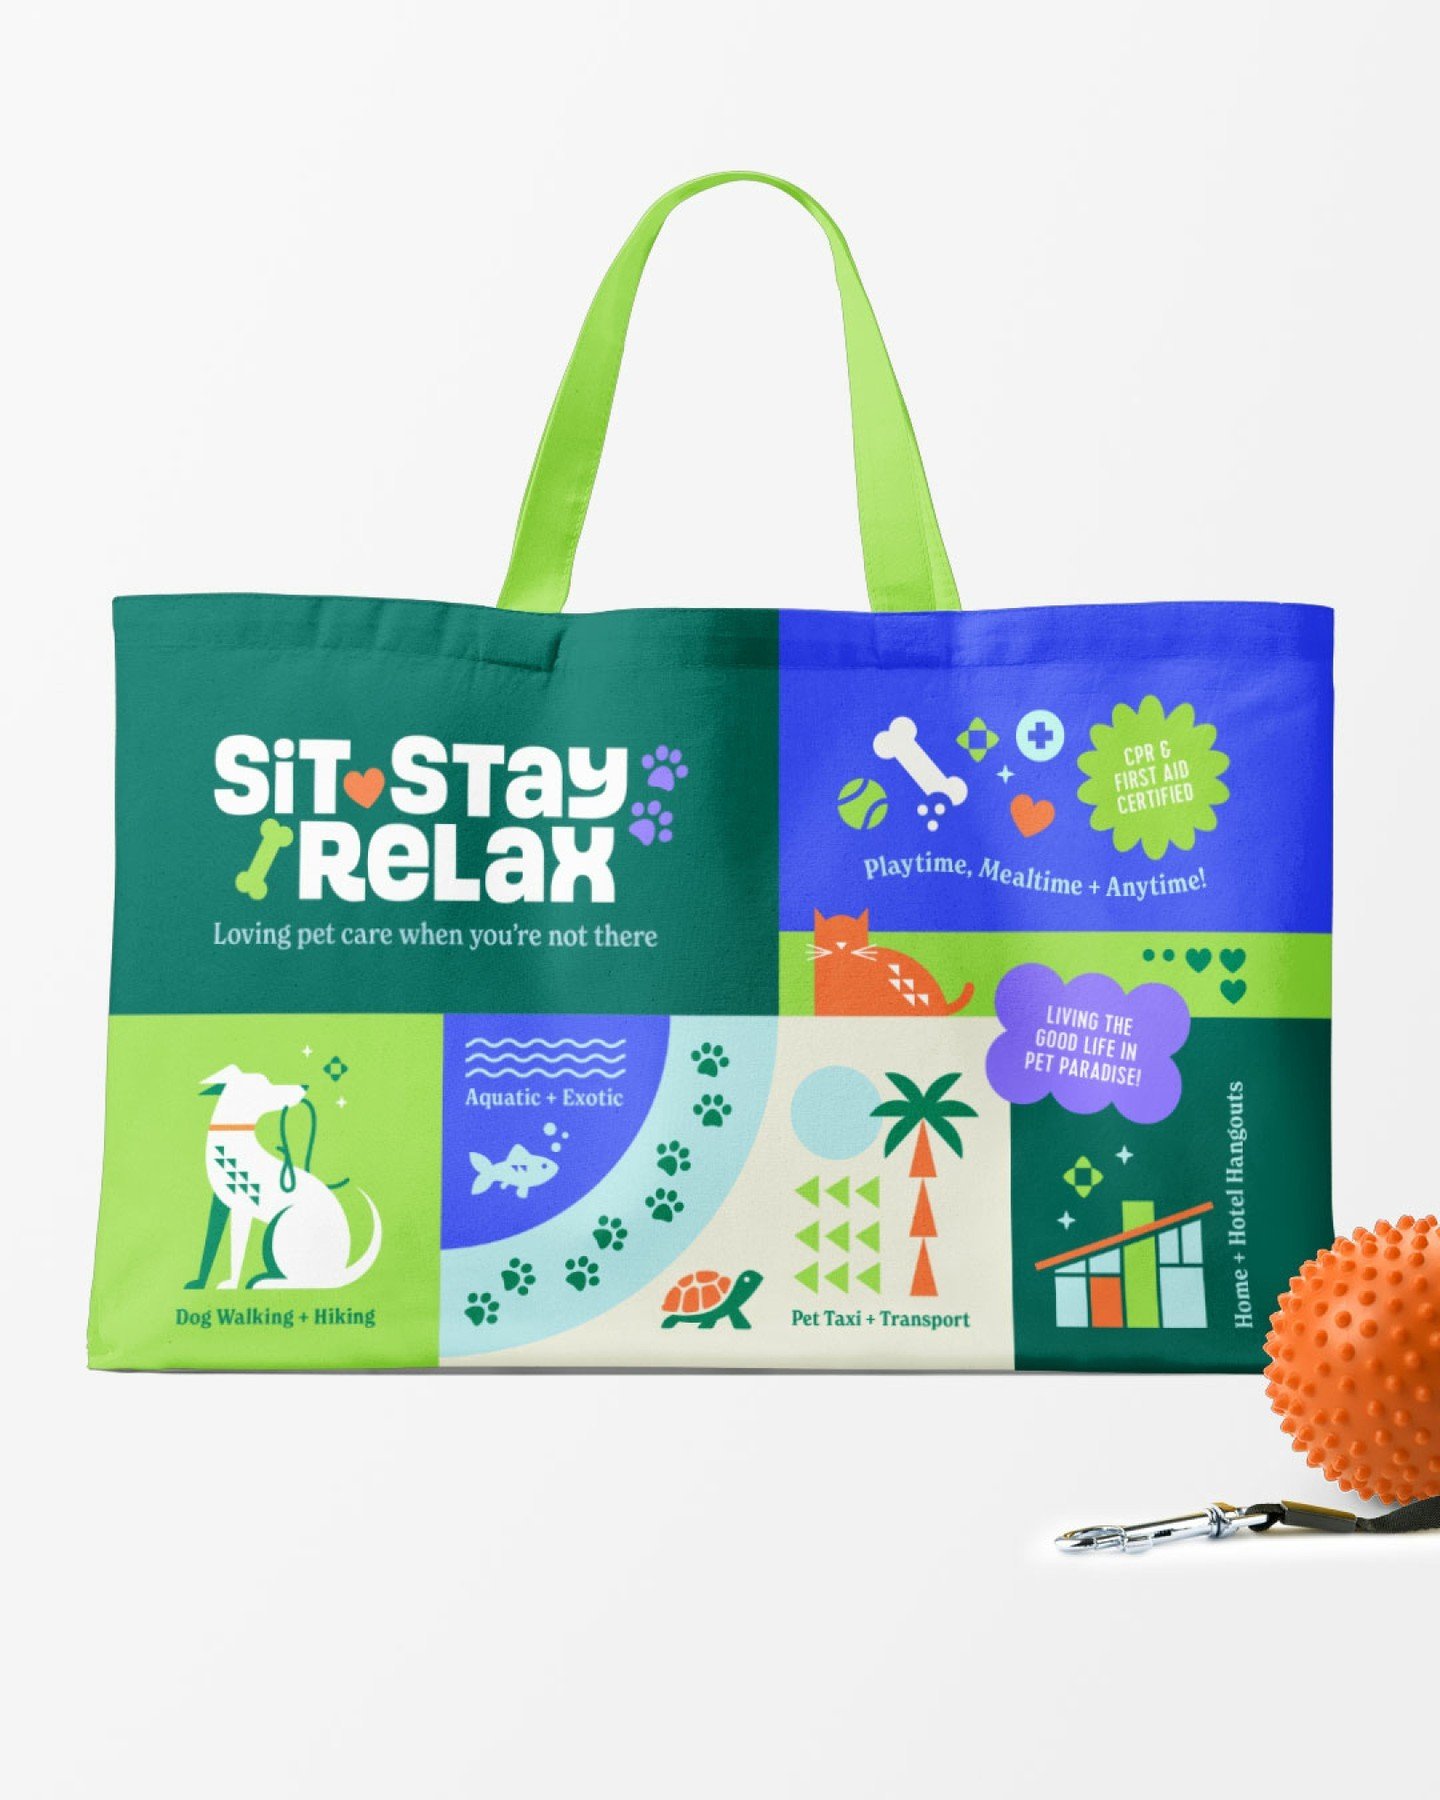 We teased some illustrations from the Sit Stay Relax project a few weeks ago, and here is a deeper look at the full brand rollout. A bold, fun, vibrant, and endearing brand - just like the passion owner Madisyn embodies caring for pets throughout the